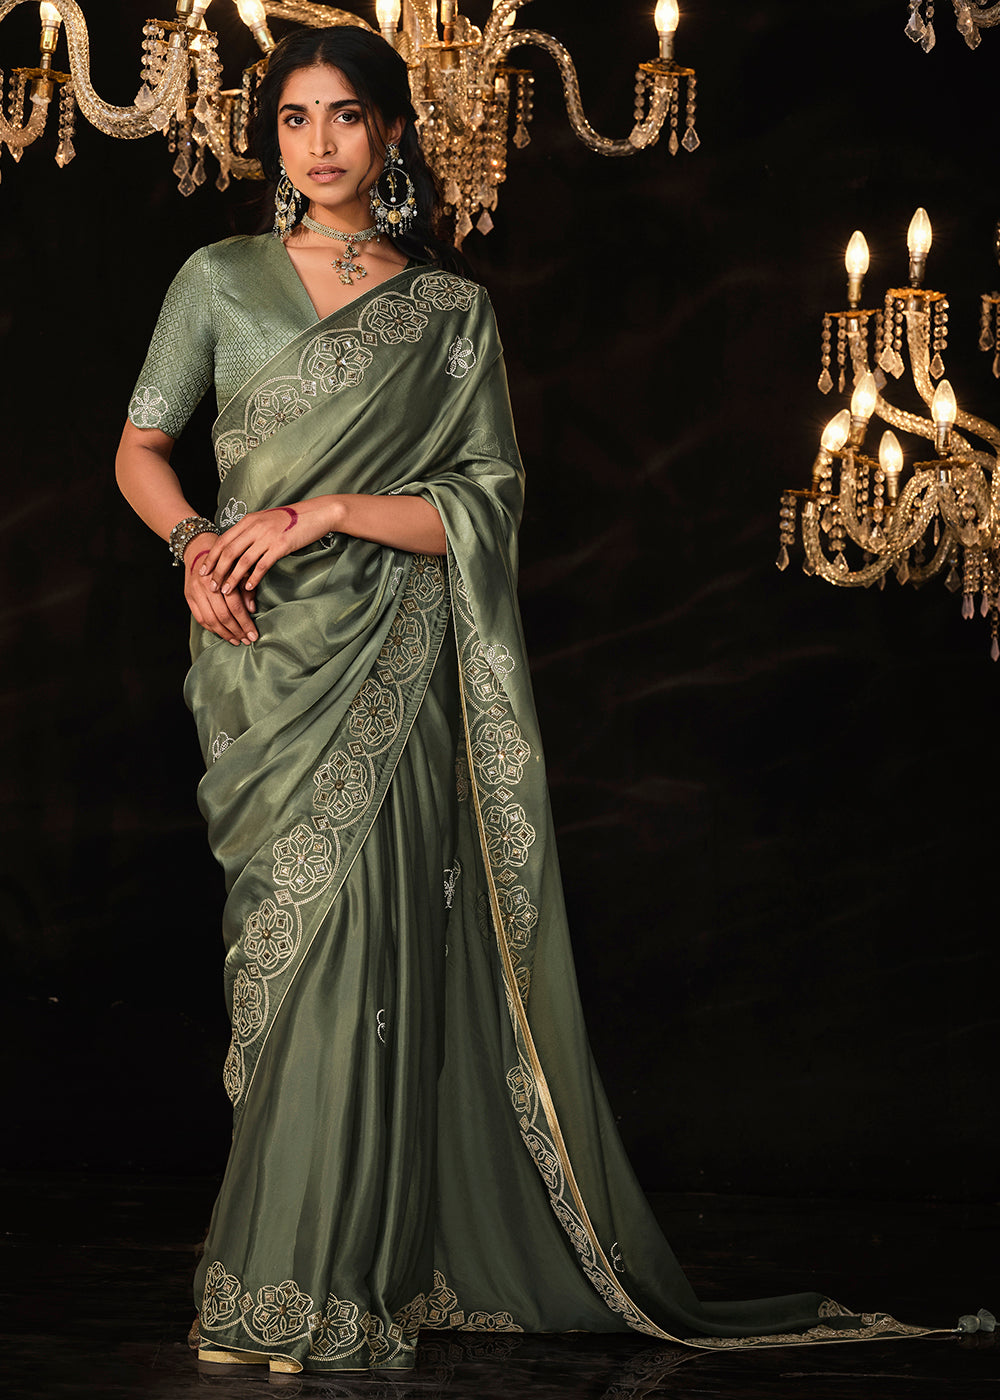 Buy Now Fancy Grey Embroidered Designer Wedding Wear Saree Online in USA, UK, Canada & Worldwide at Empress Clothing.